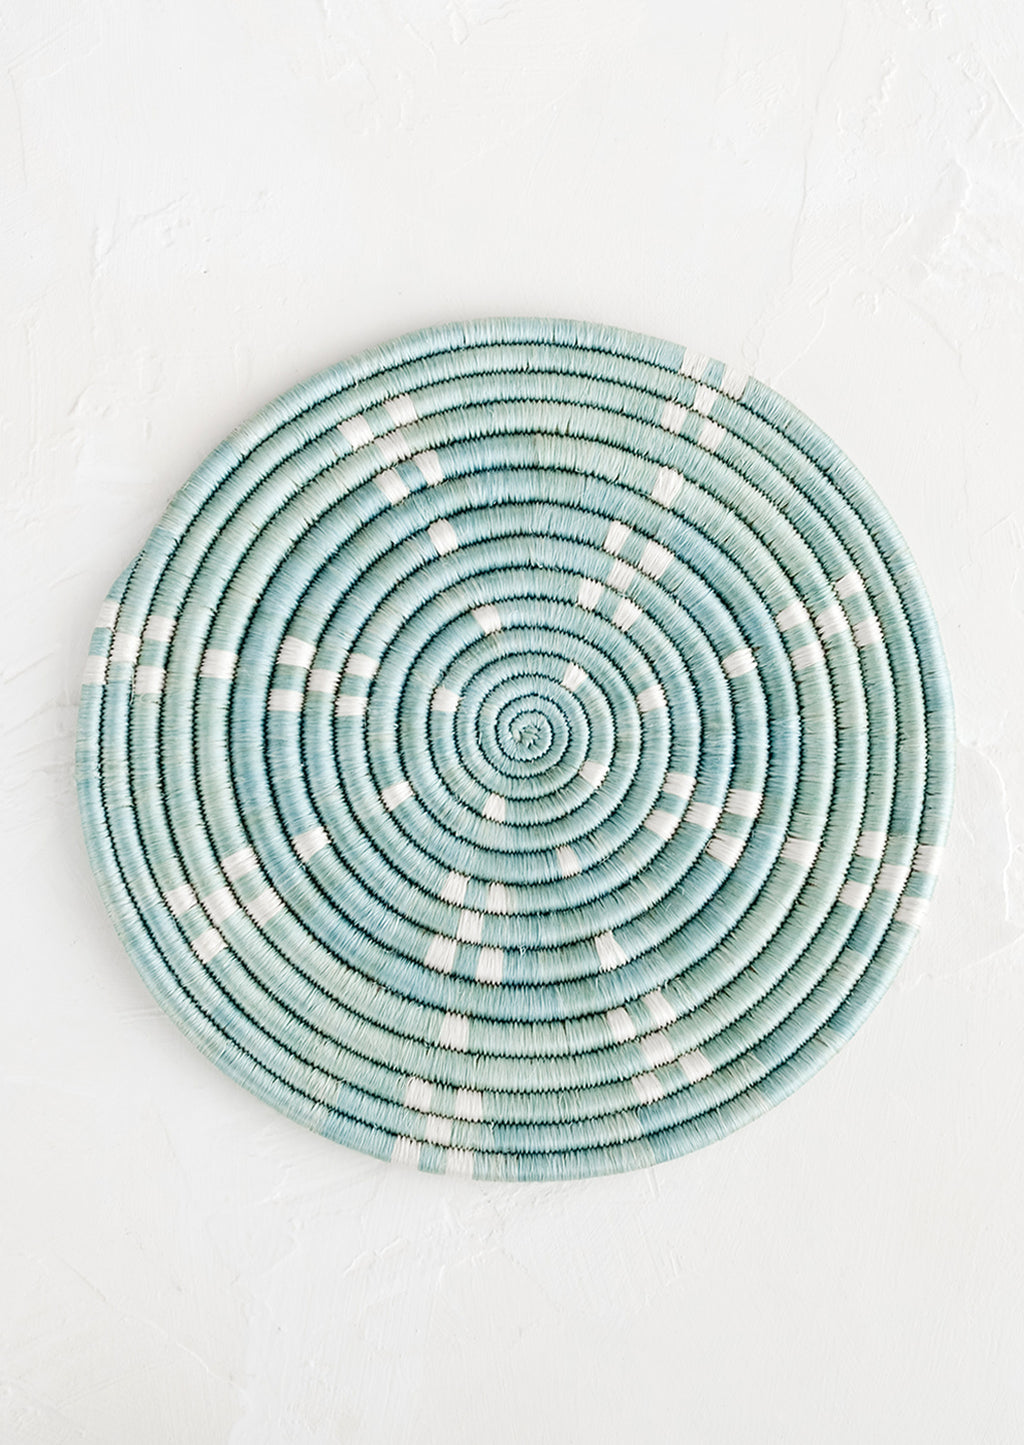 Lake Blue: A round sweetgrass trivet in blue with white dash pattern.